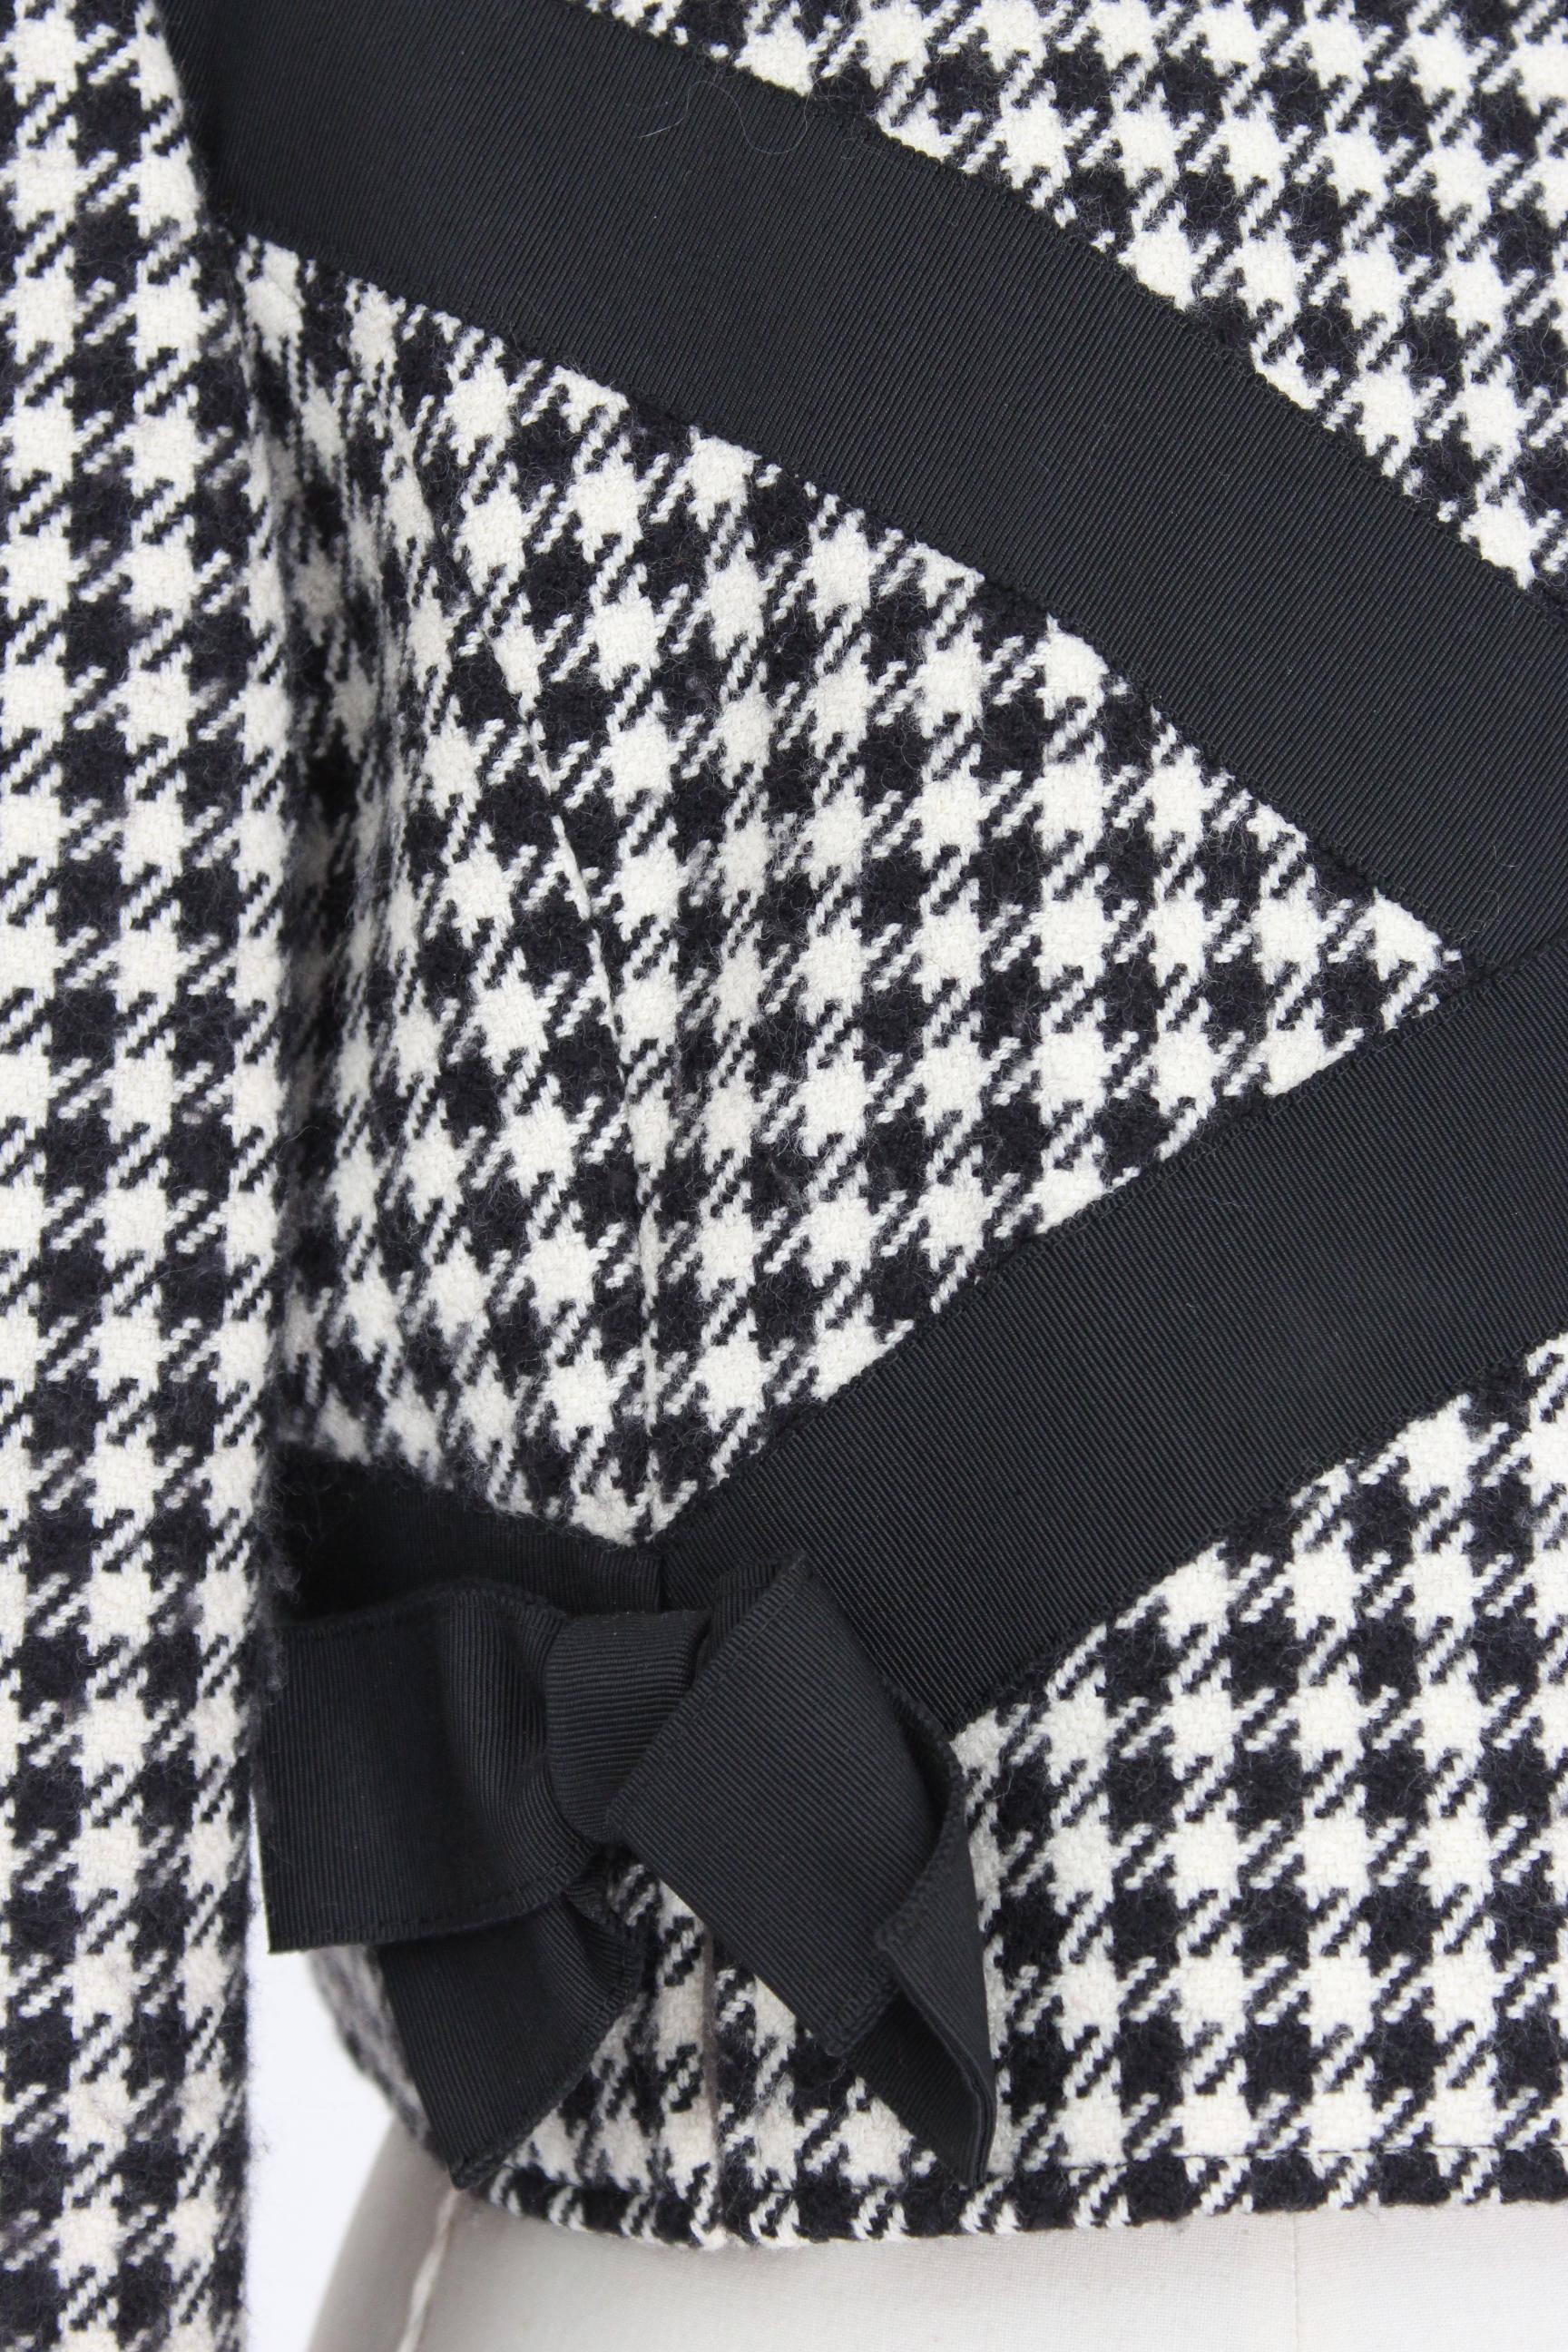 Valentino Boutique Black White Wool Houndstooth Evening Skirt Suit 1980s 2